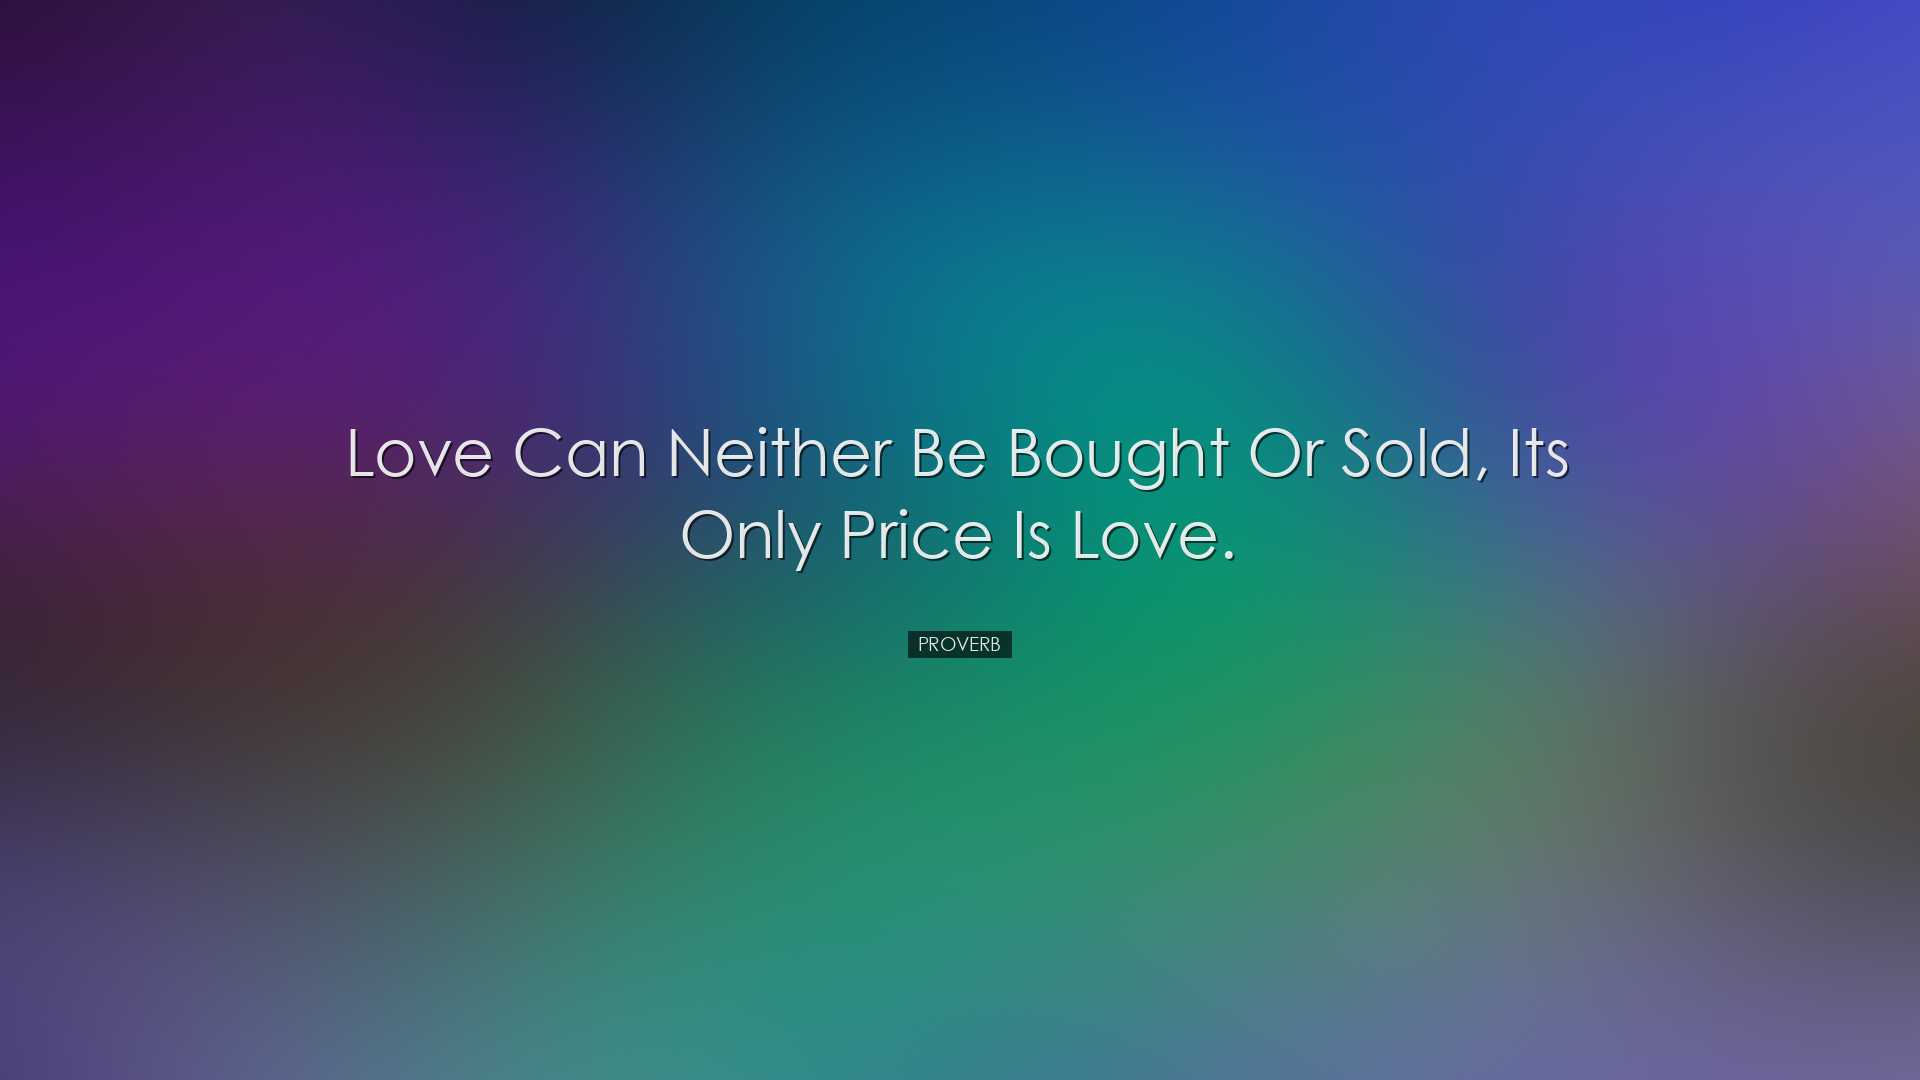 Love can neither be bought or sold, its only price is love. - Prov